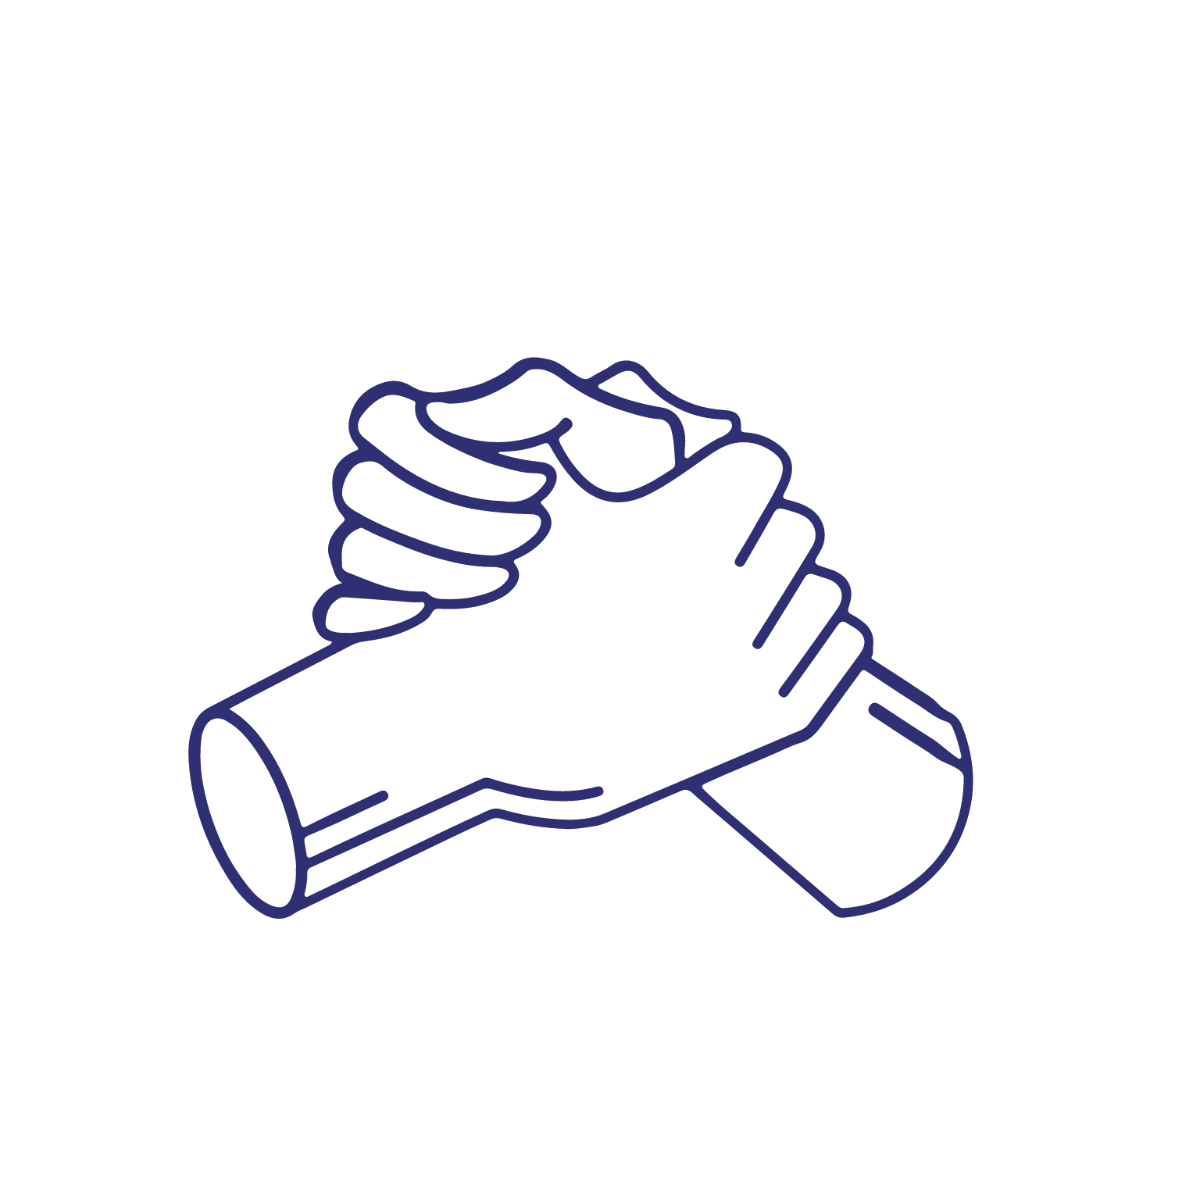 Hands Holding Vector Template